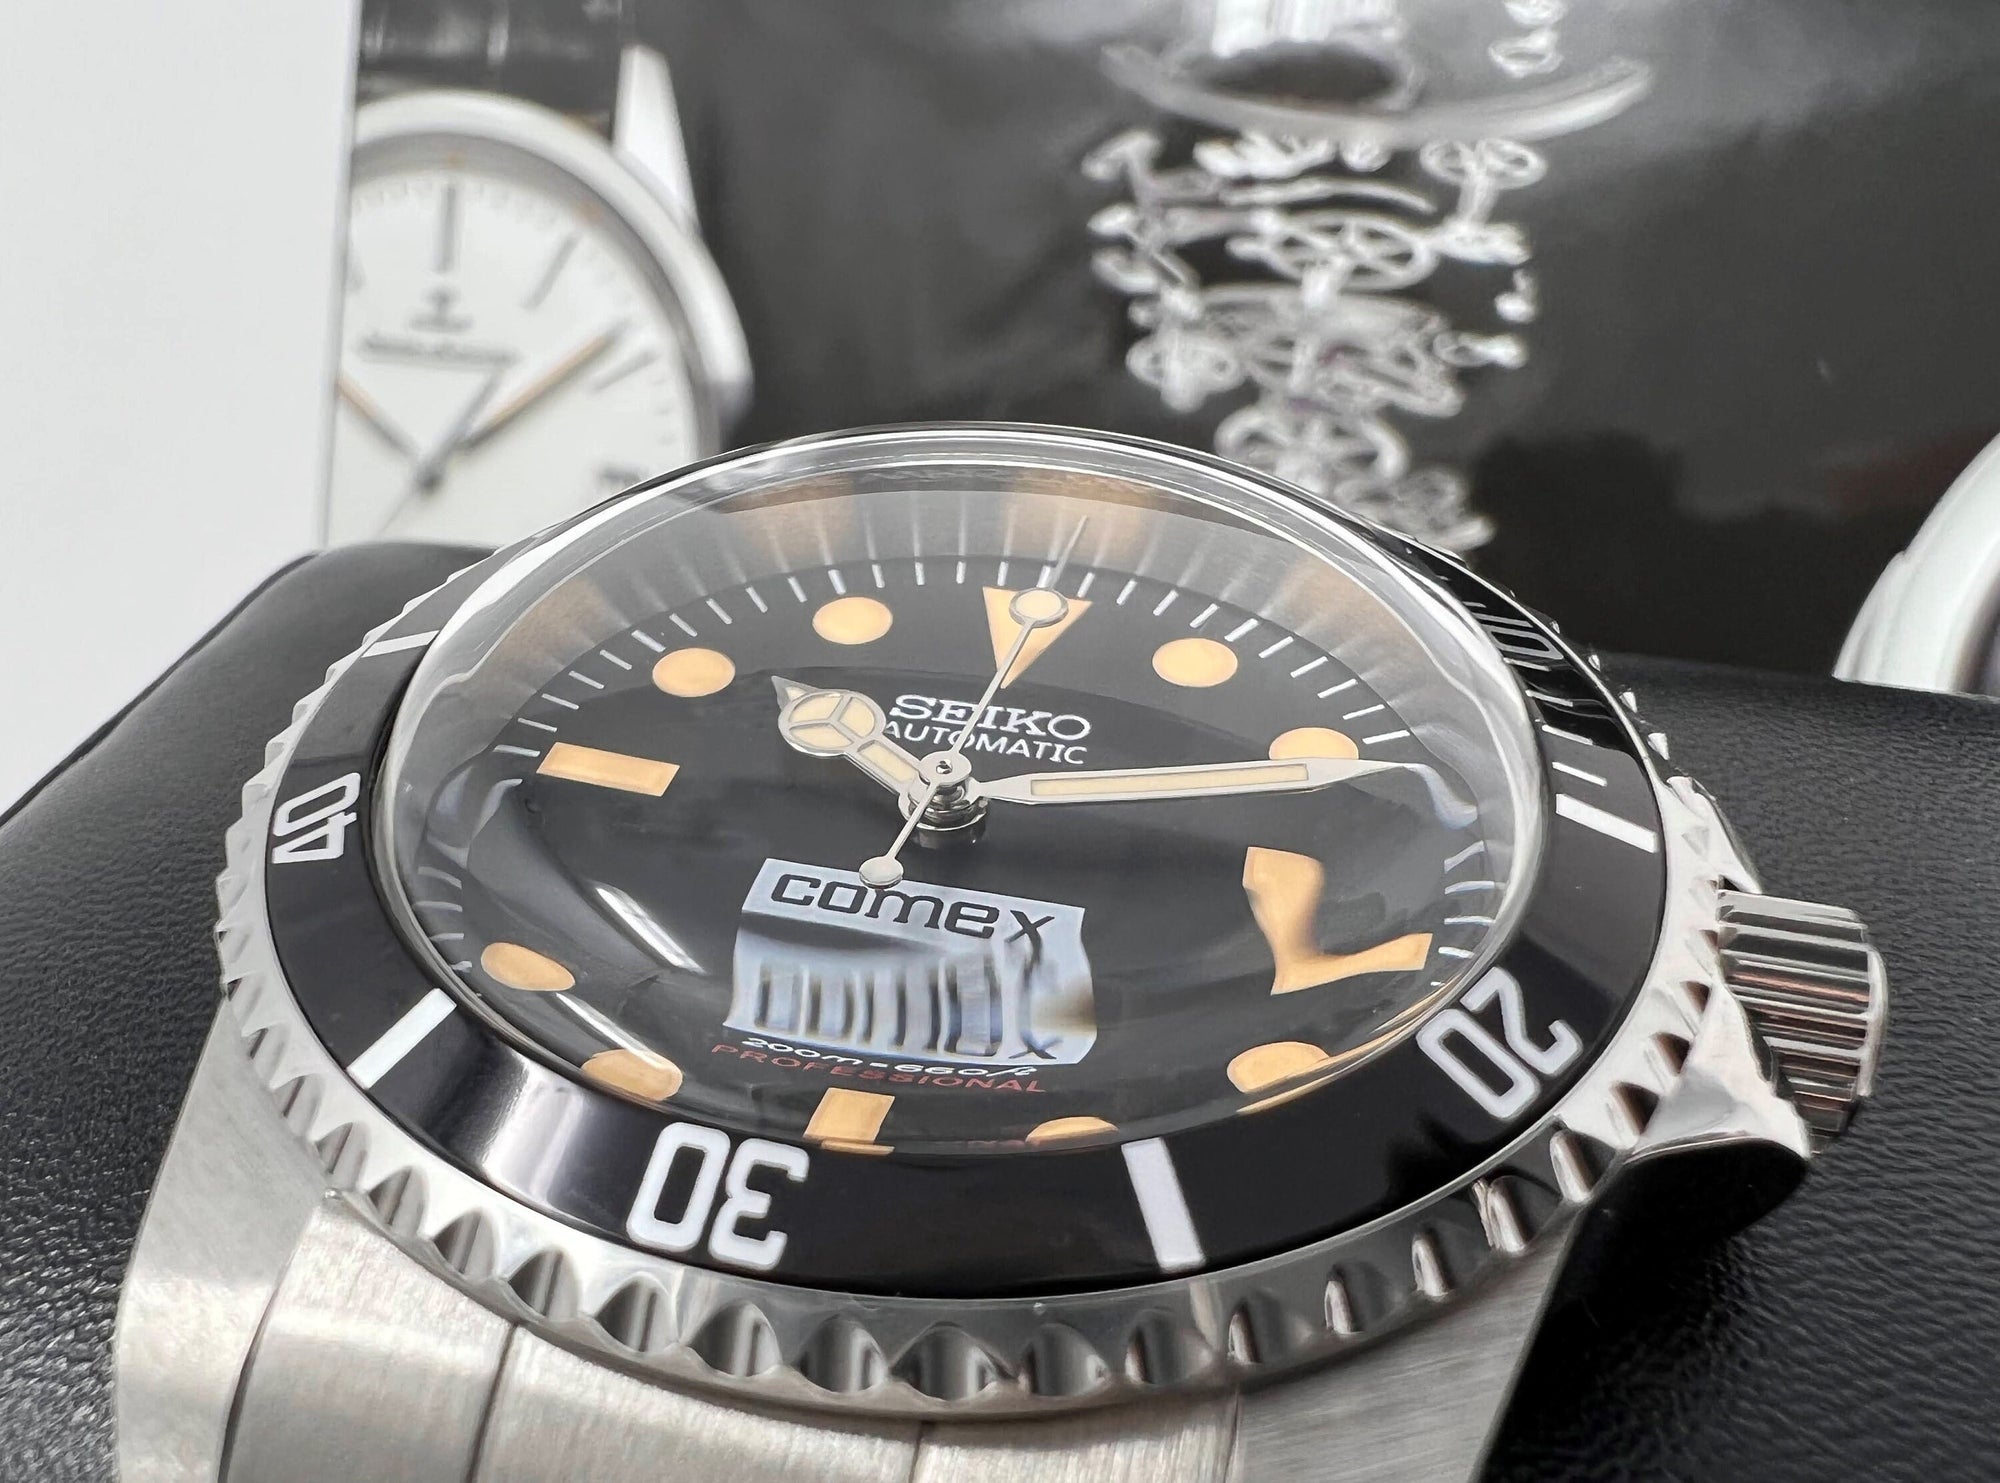 Seiko Submariner - Comex Vintage Style Diver | Beautiful Domed Crystal on Oyster | 39.5mm | Milsub | Military Sub | Vintage Sub | Diving